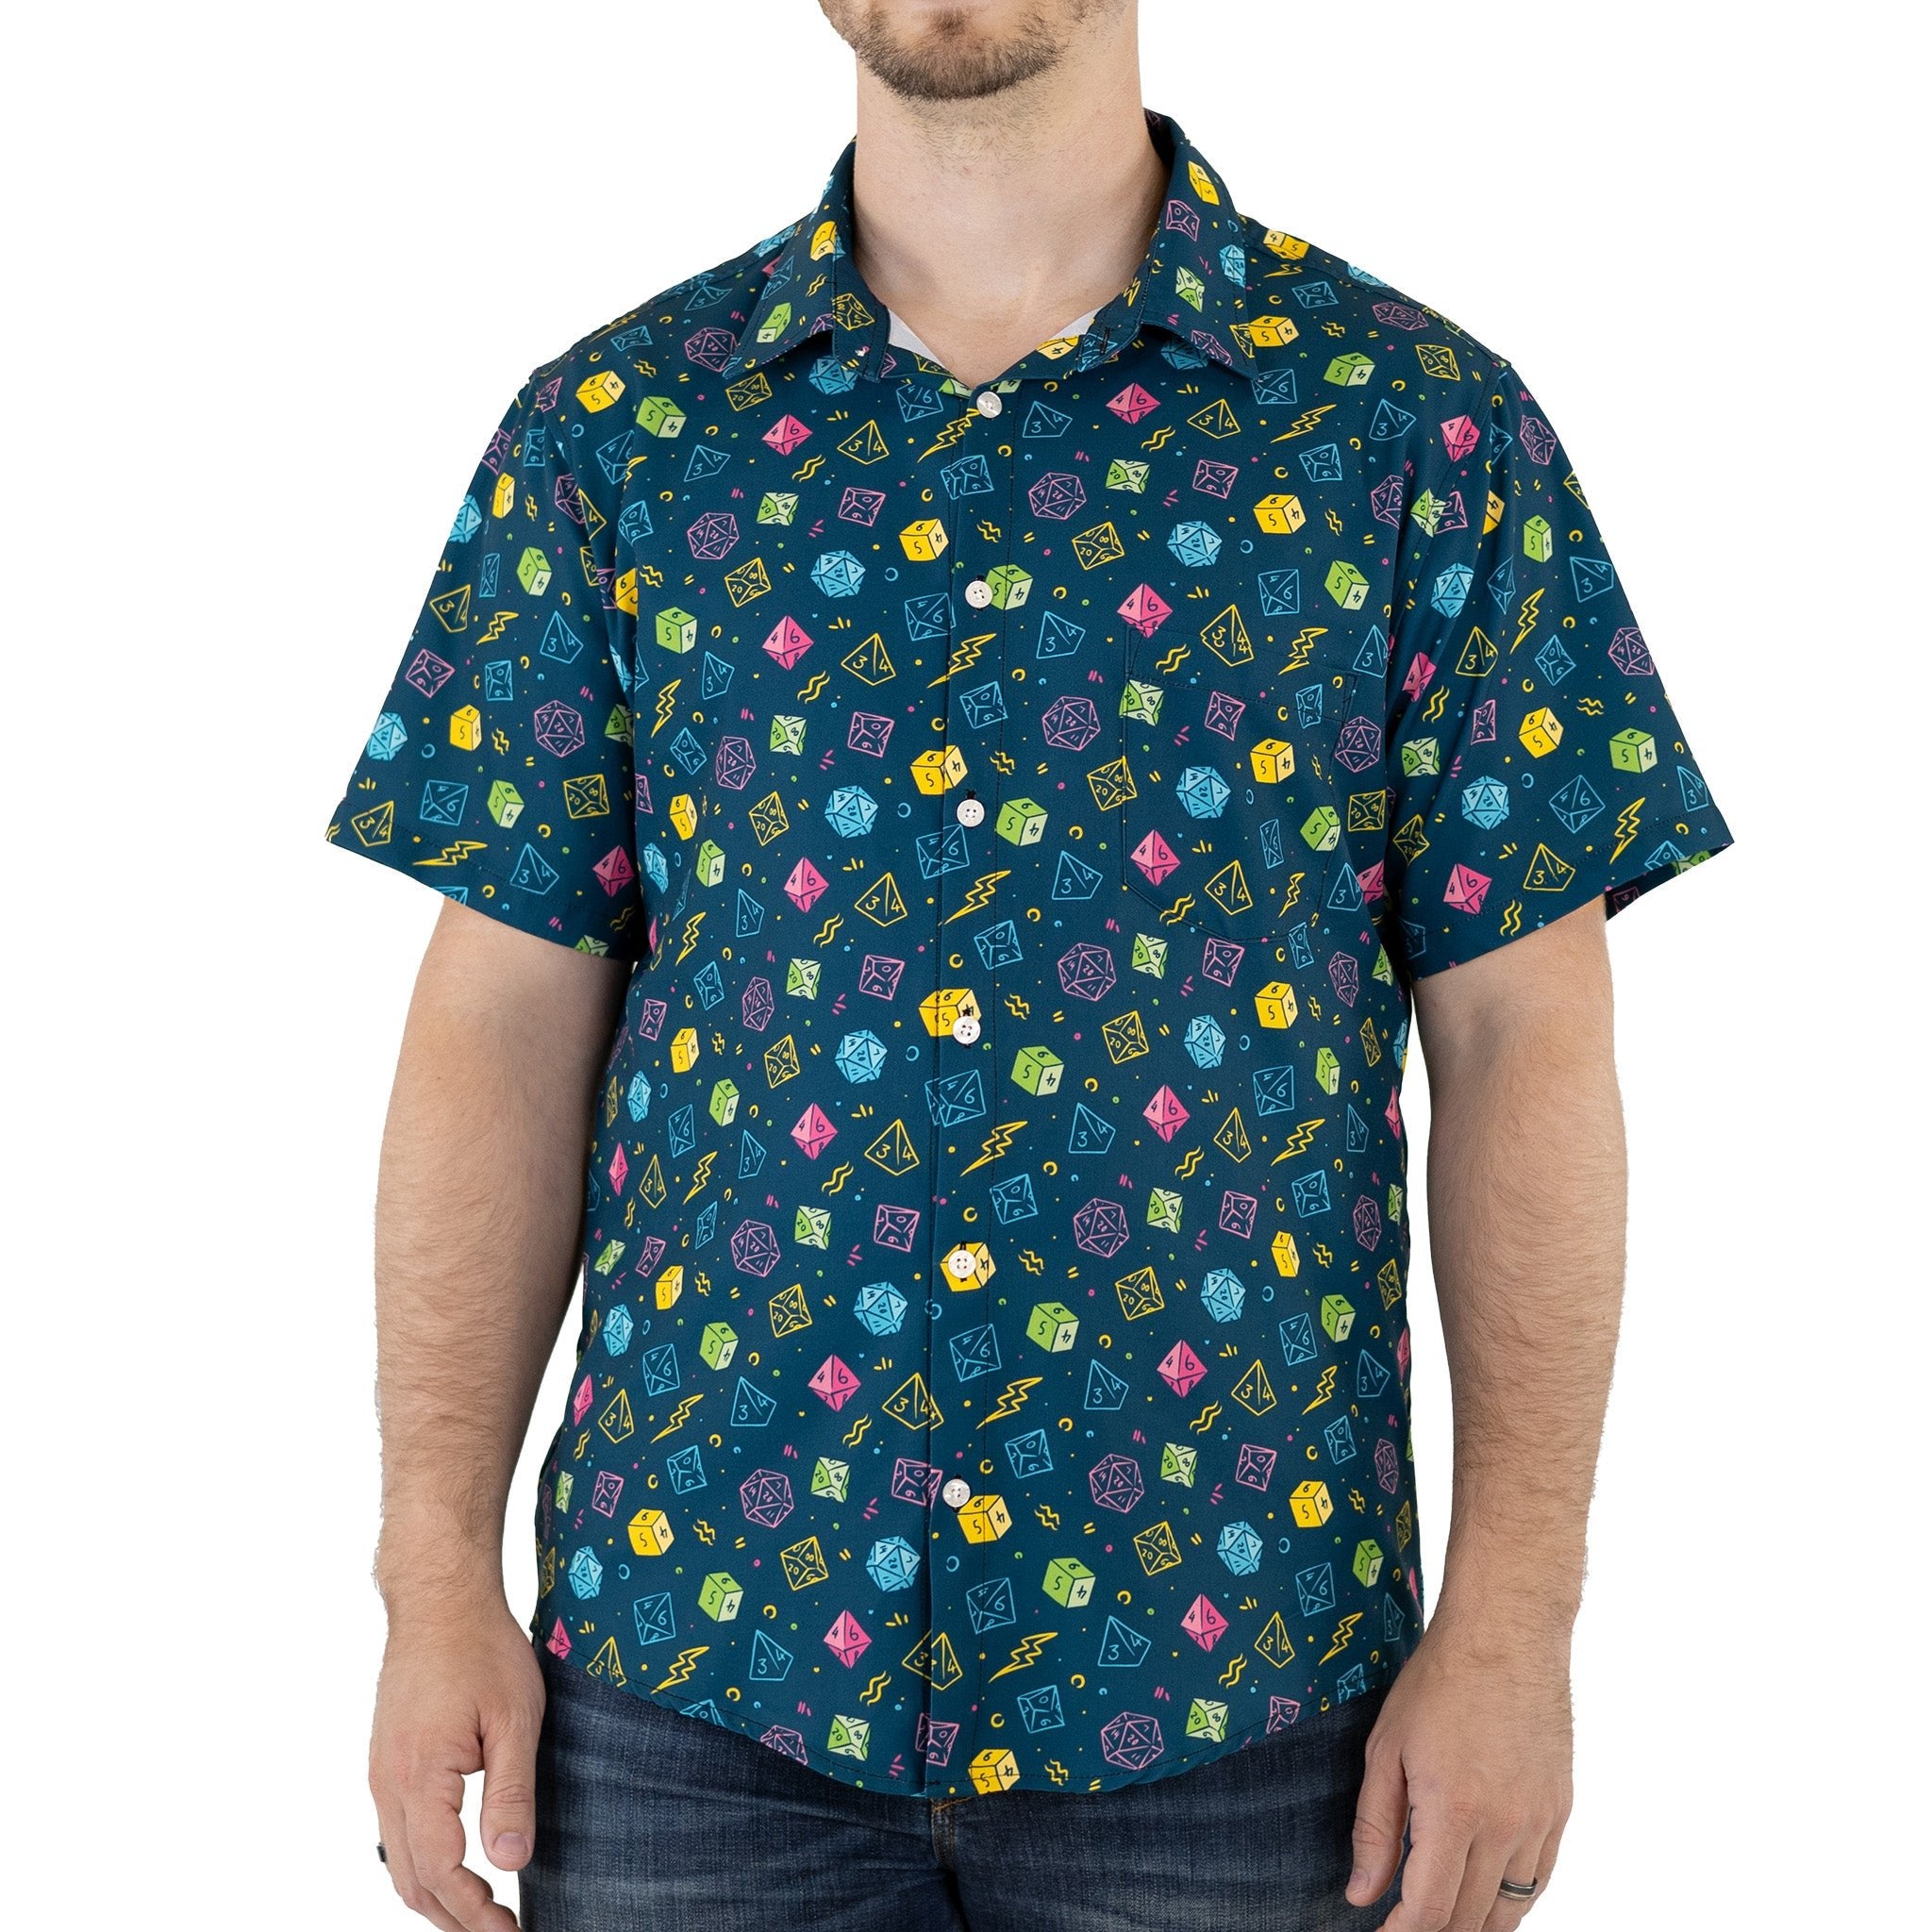 Ready-to-Ship Dnd RPG Dice Blue Button Up Shirt - adult sizing - dnd & rpg print - Maximalist Patterns